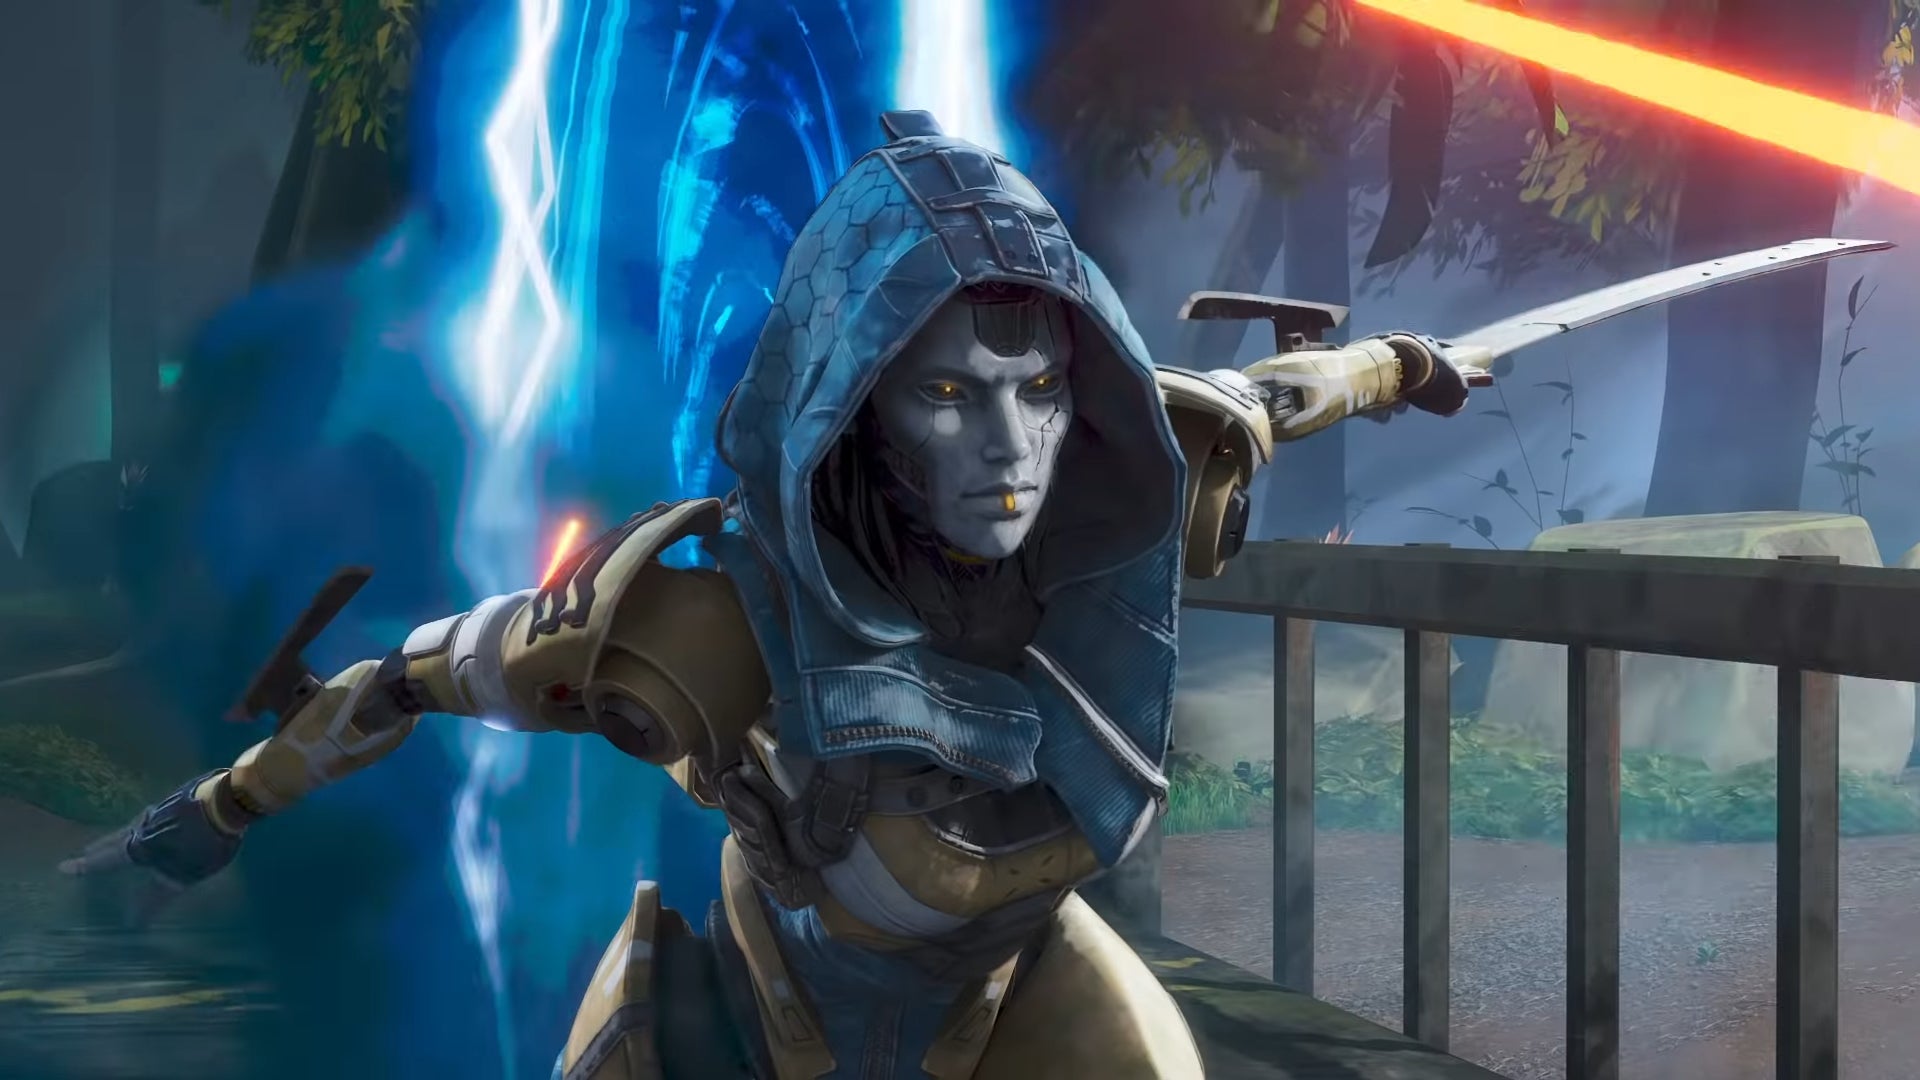 Ash exits one of her portals with her sword at the ready in Apex Legends.